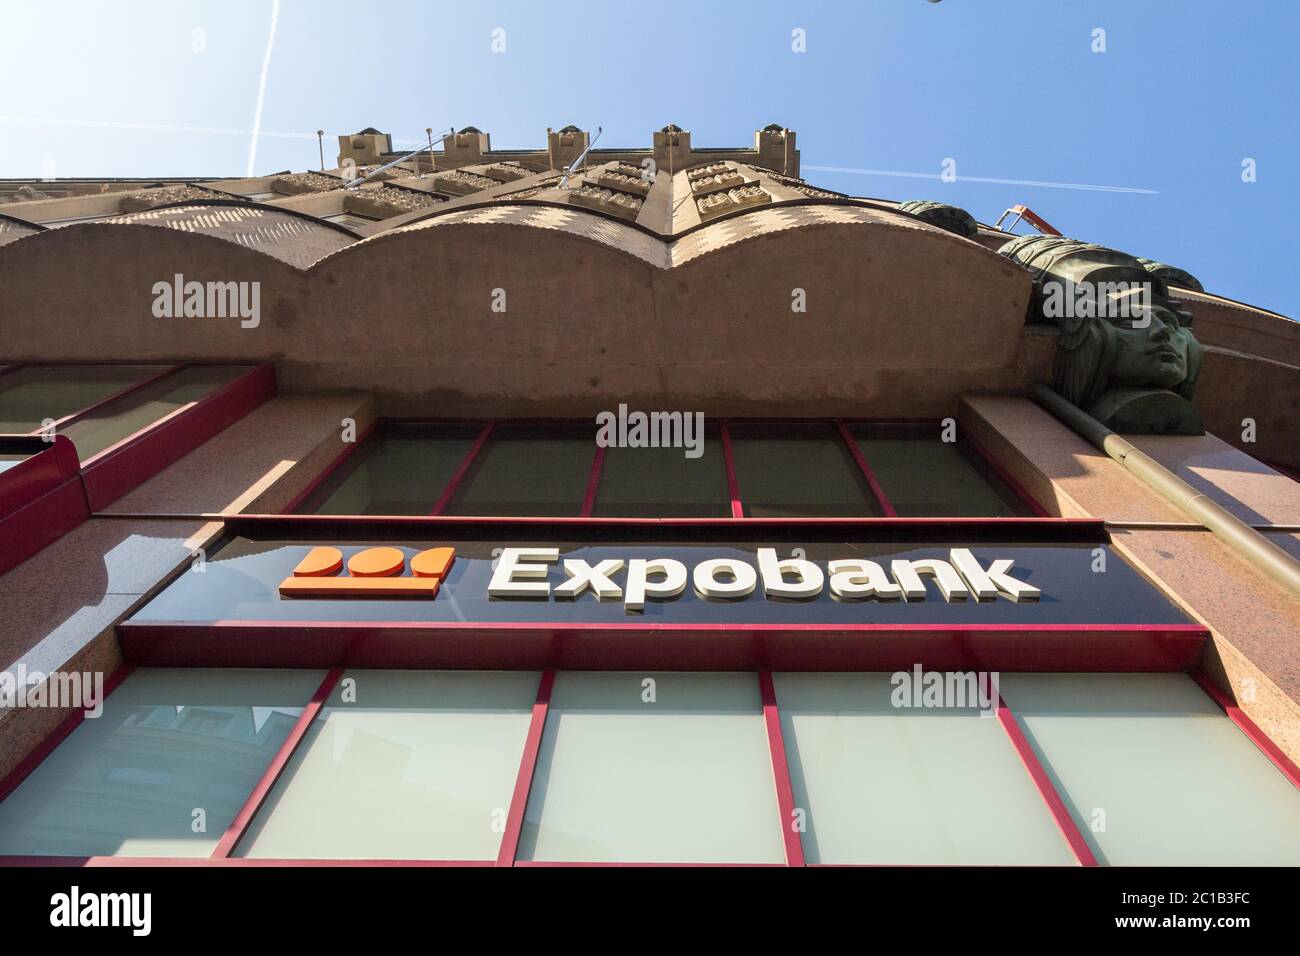 PRAGUE, CZECHIA - OCTOBER 31, 2019: Expobank logo in front of their local office in Prague. Expobank is a retail bank from Czech Republic spread in Ea Stock Photo